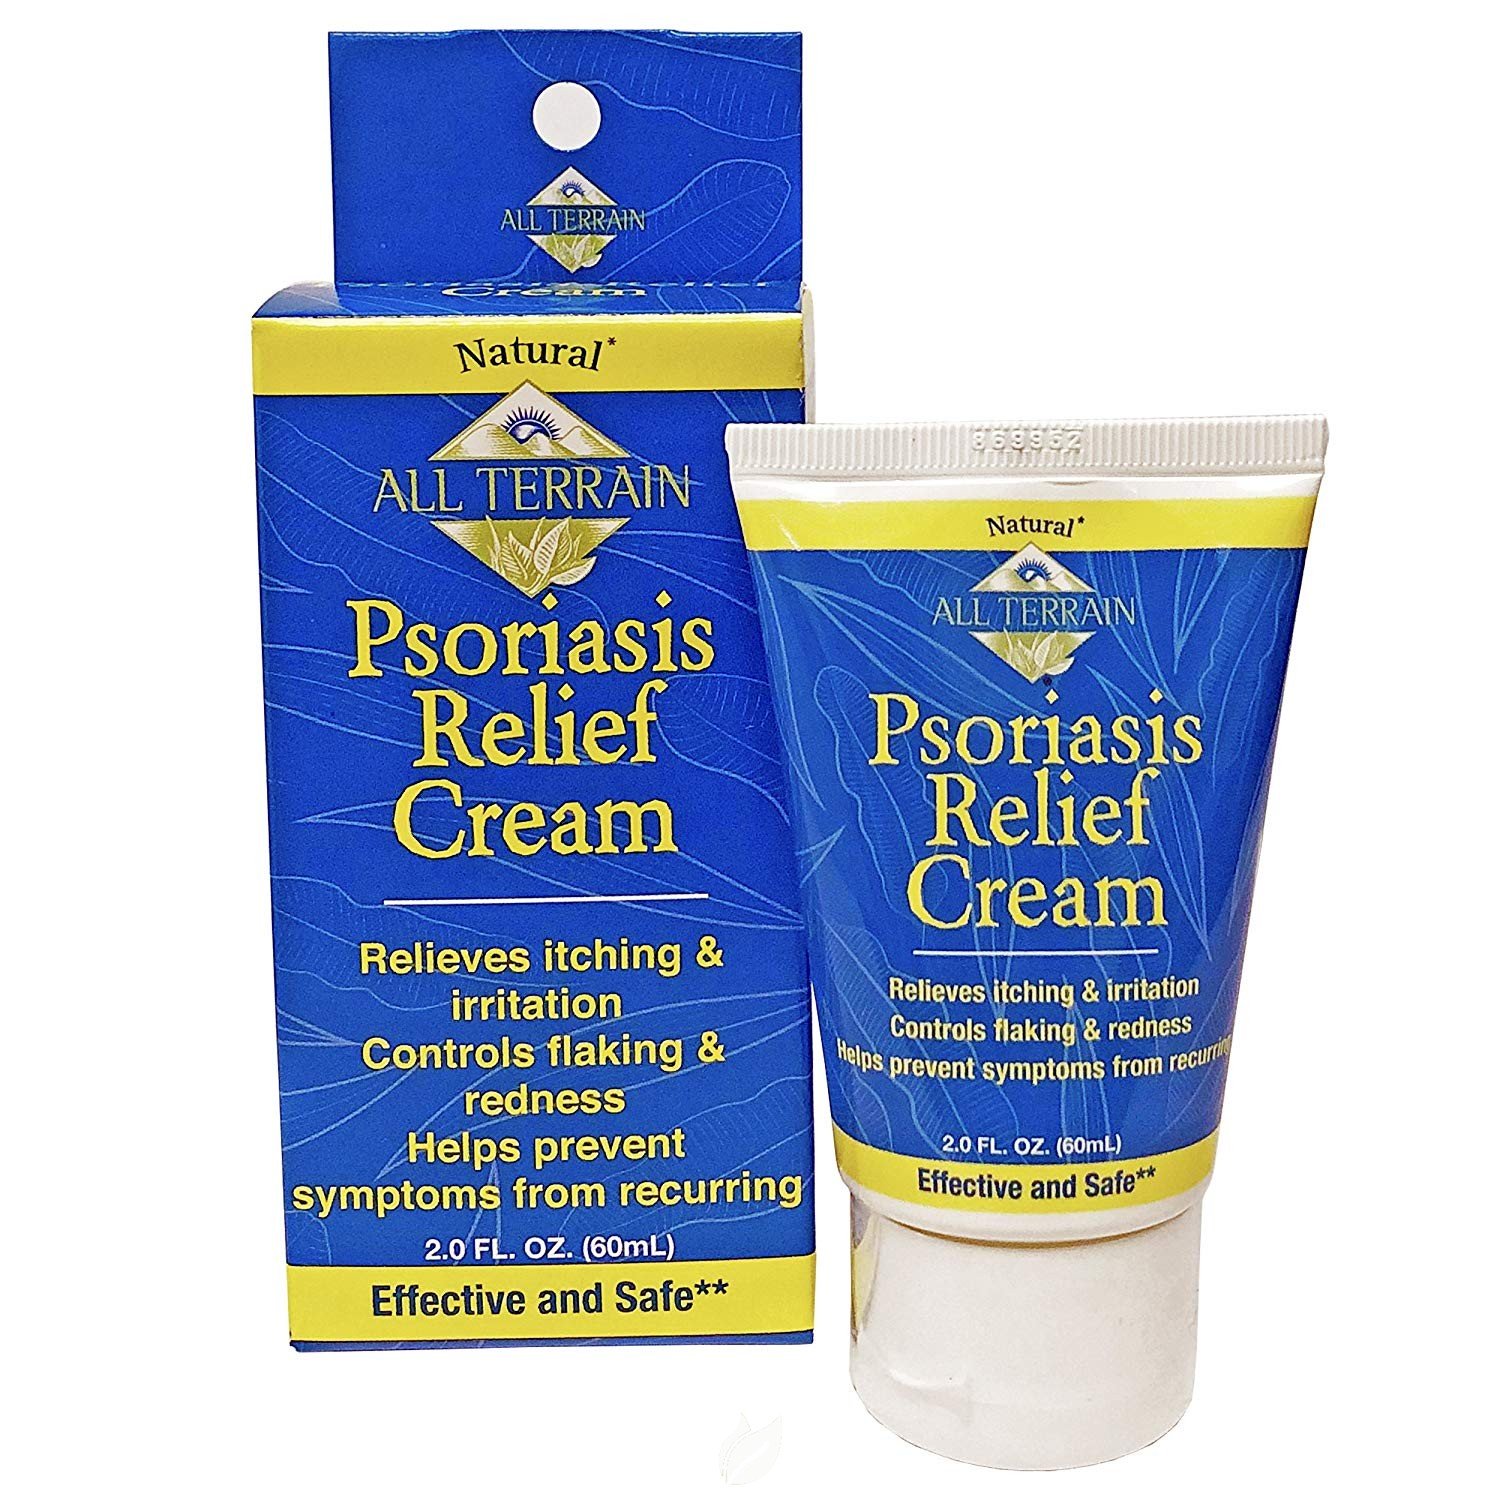 Psoriasis Relief Cream 2 Oz by All Terrain, Pack of 2